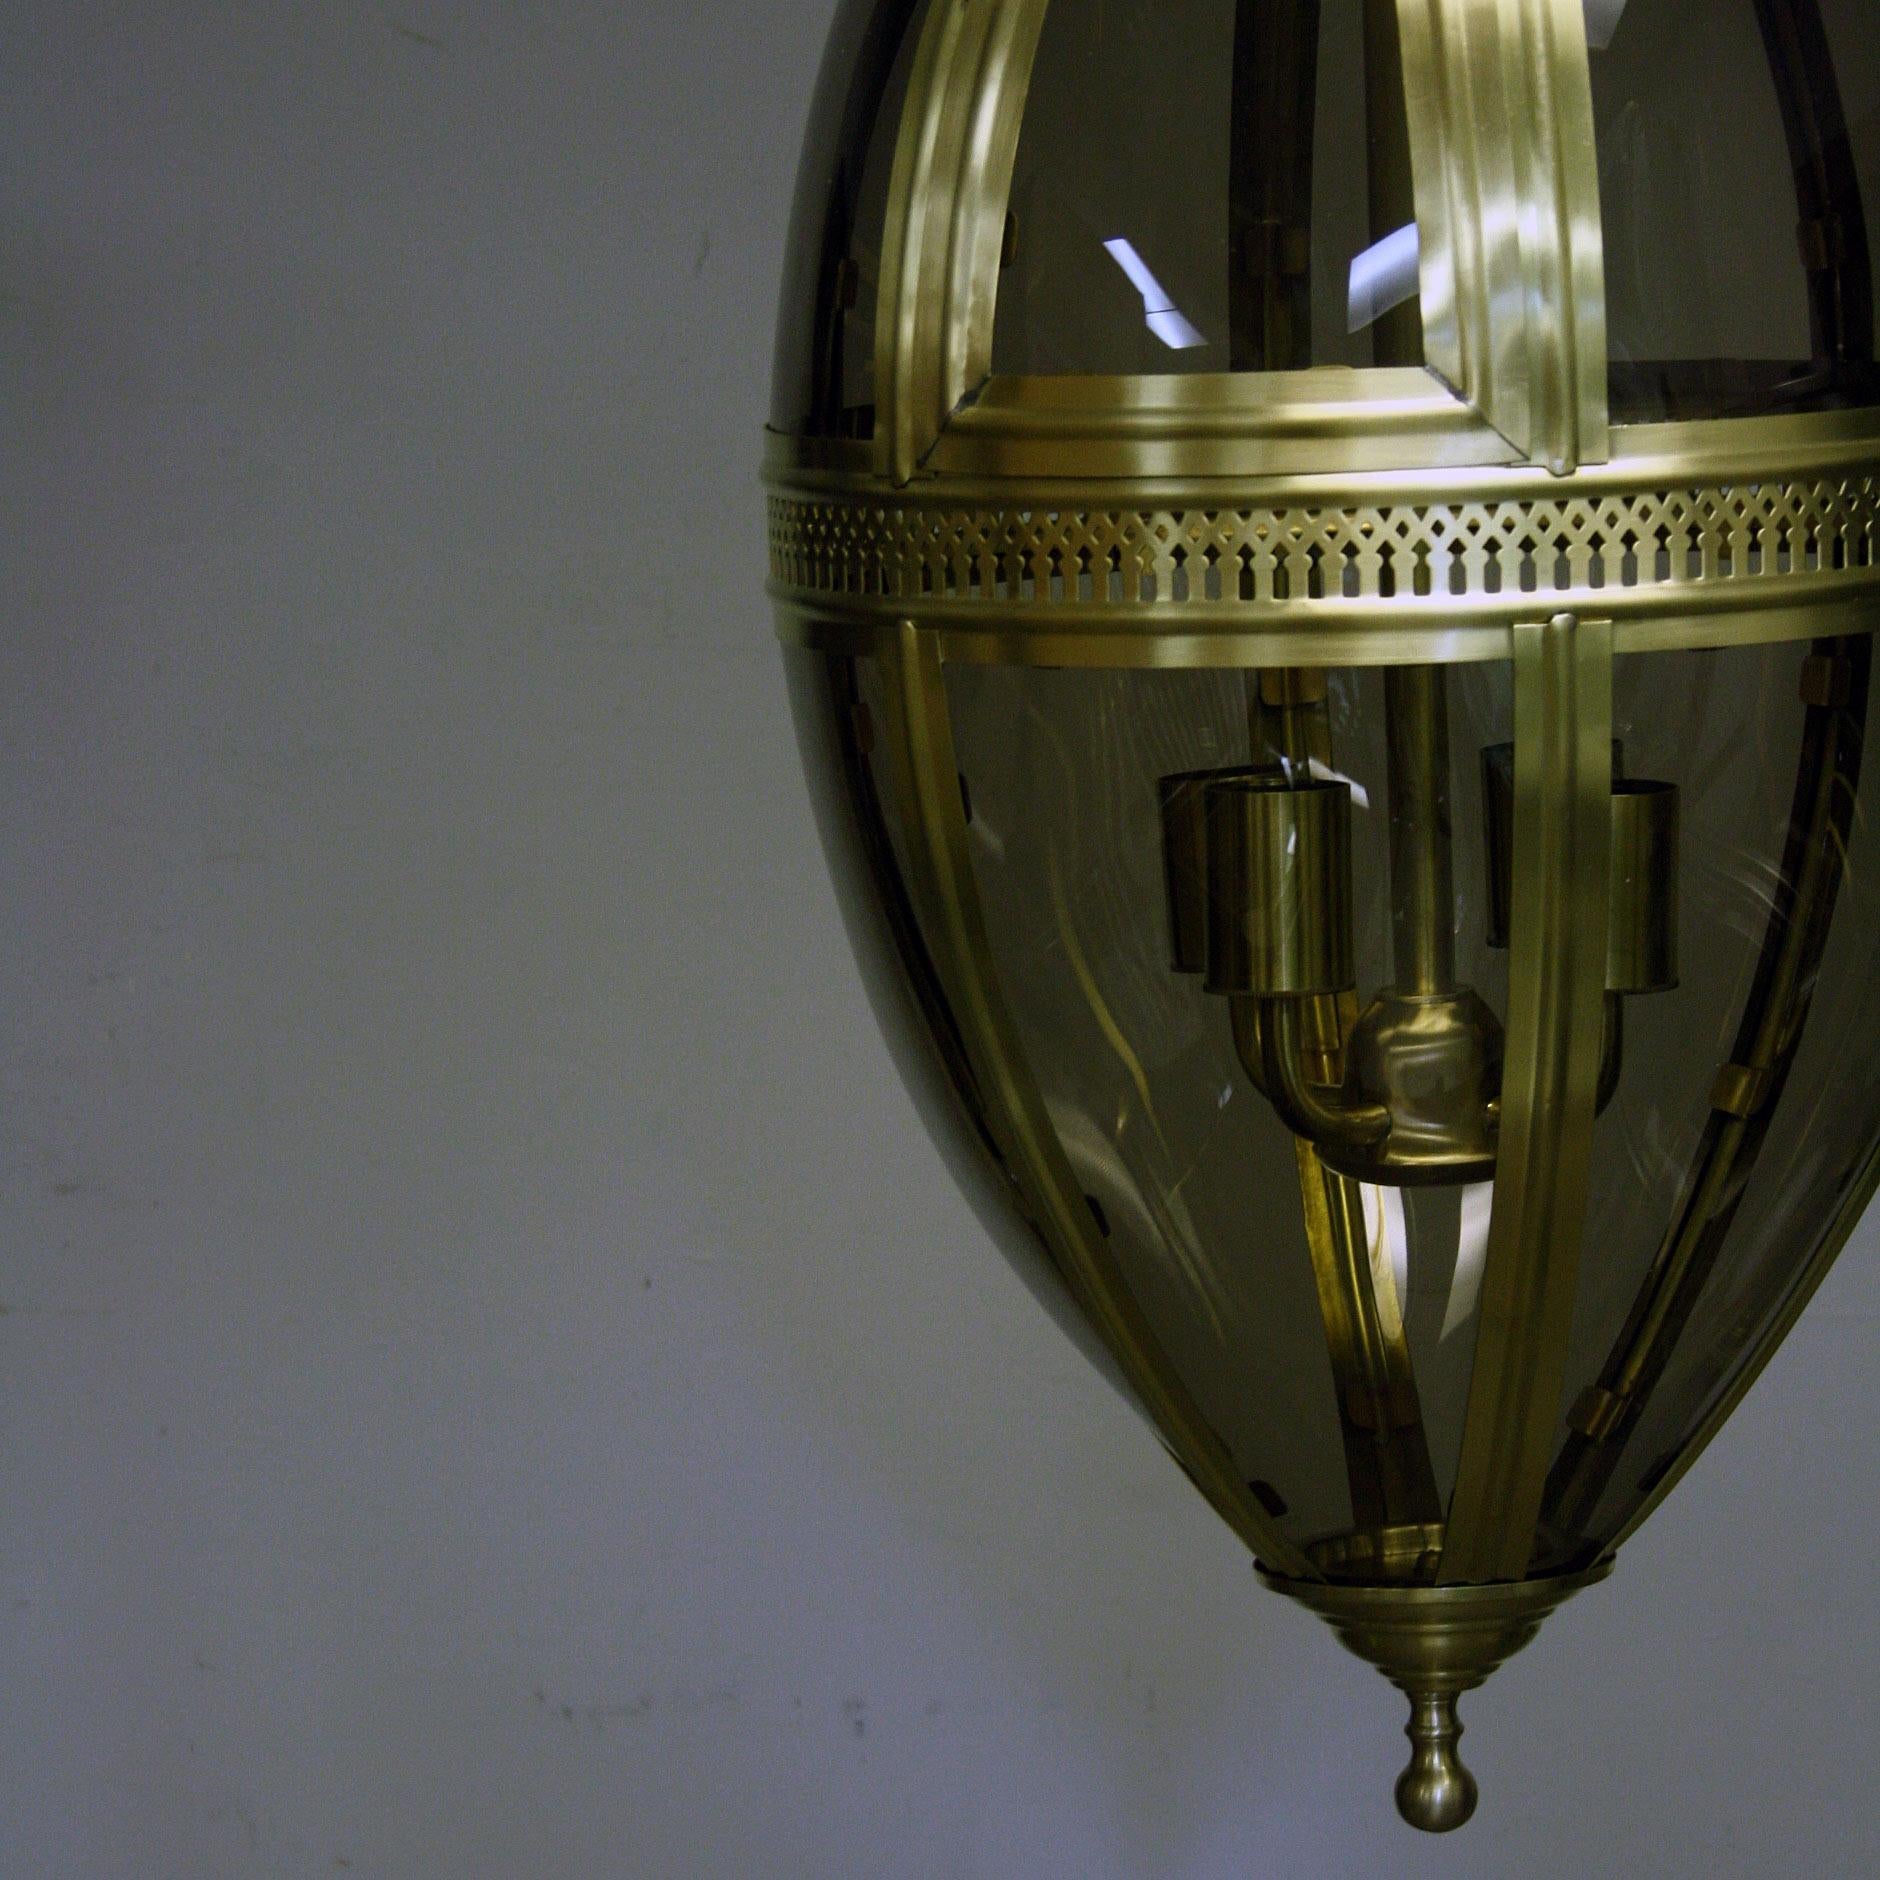 A reproduction oval shaped hanging lantern with curved glass panels, comes in a black and brass coloured finish.

Have 4 of each colour in stock so would work perfectly for a bar or restaurant project or great as a single piece for an interior